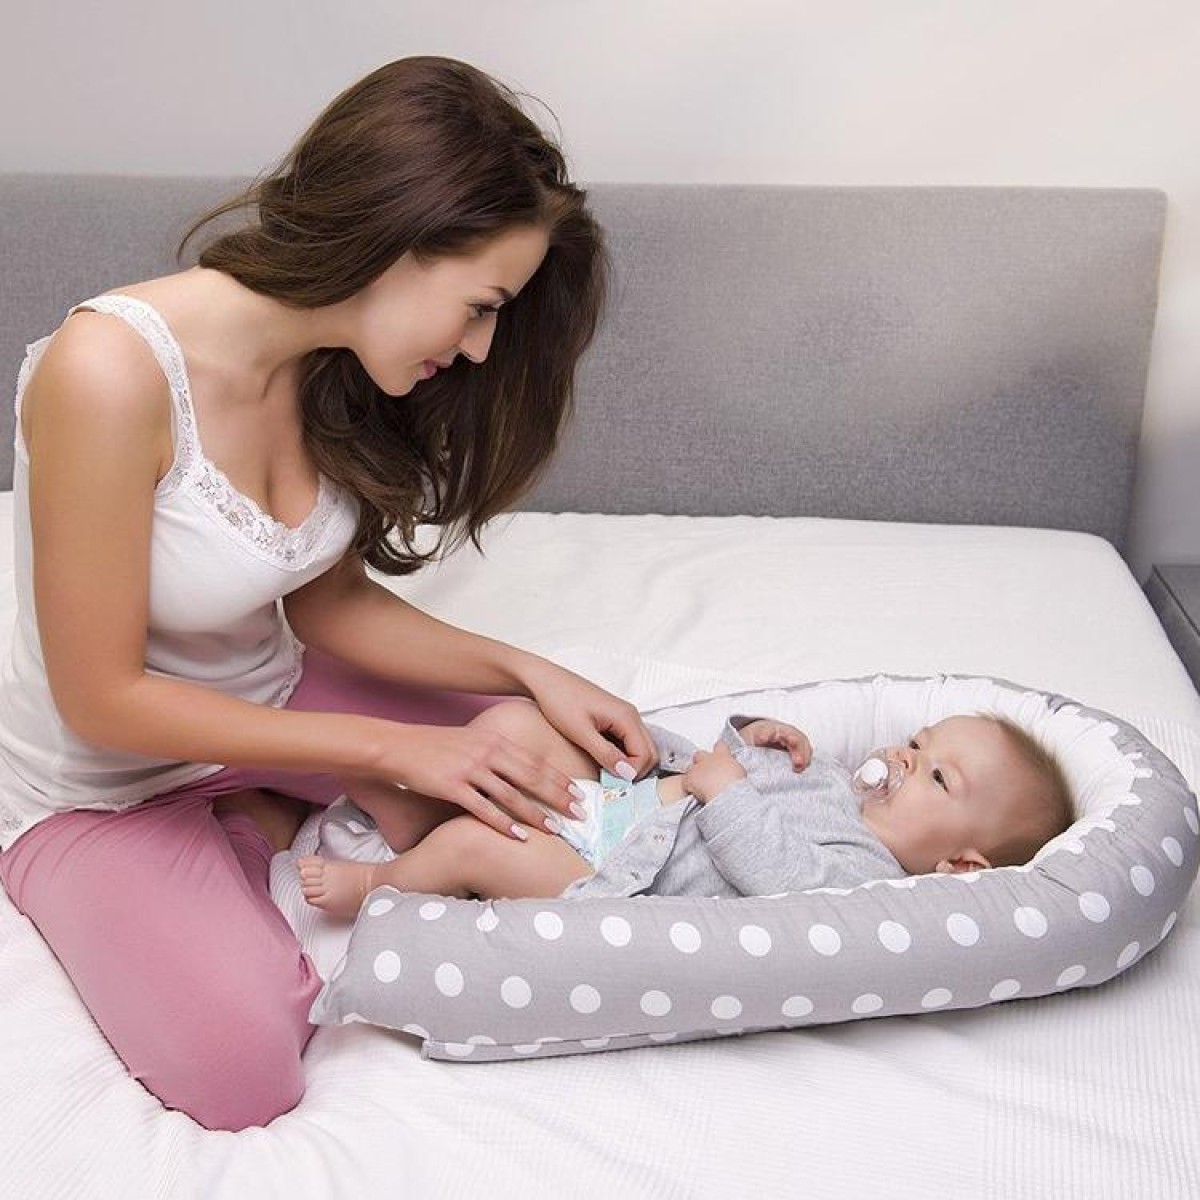 80*50cm  Baby Bed Newborn Nursing Bionic Bed Crib Cot Baby Sleeping Artifact Bed Travel Bed Bumper(BY-2021)